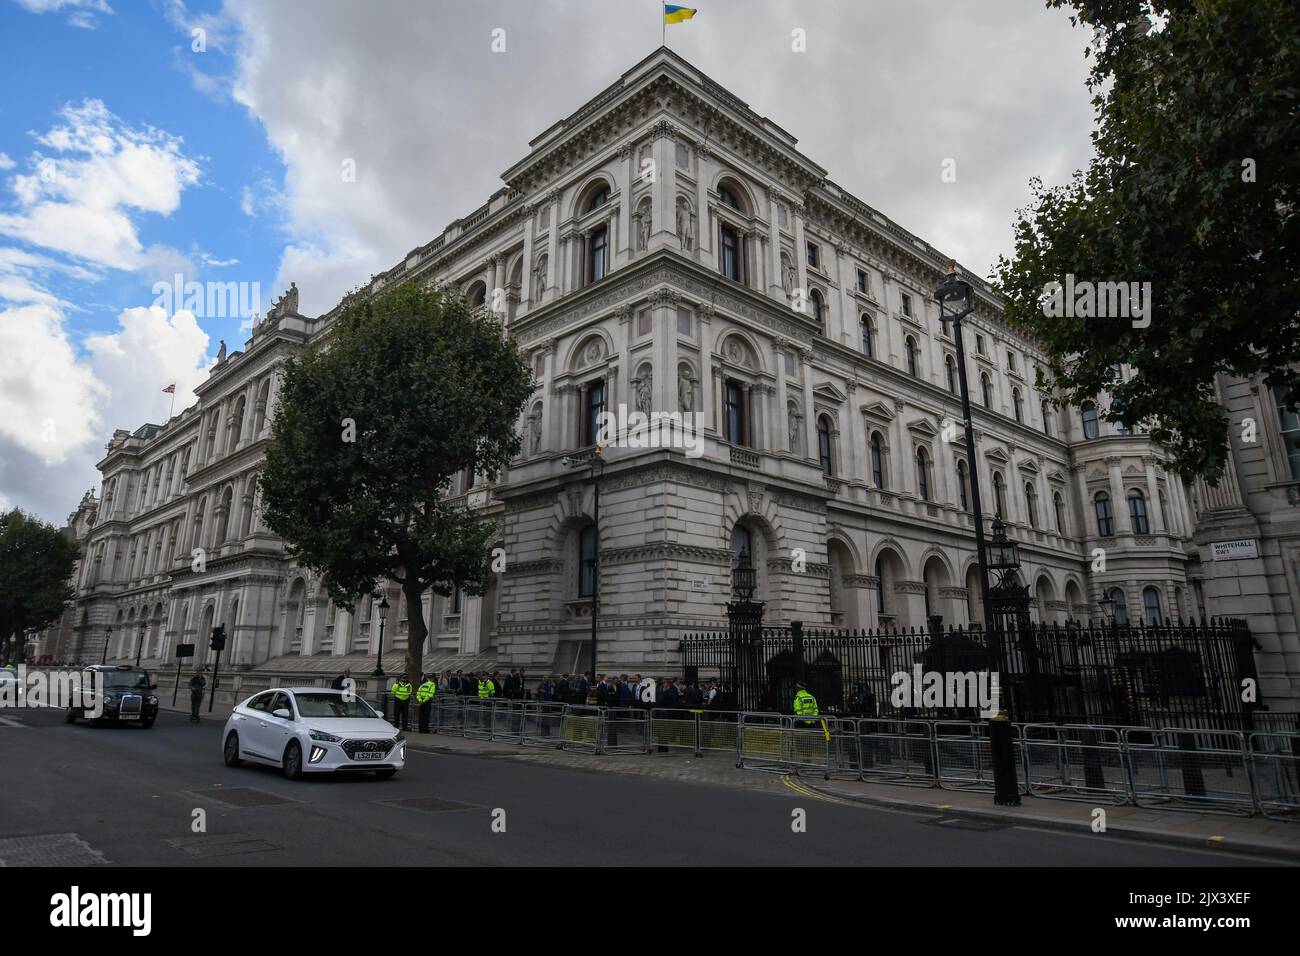 London, UK, 6th September 2022, Liz Truss becomes the UK's 56th Prime Minister and arrives in Downing Street. The heavens opened with torrential rain just before she arrived. She flew back from Balmoral after the Queen appointed her., Andrew Lalchan Photography/Alamy Live News Stock Photo